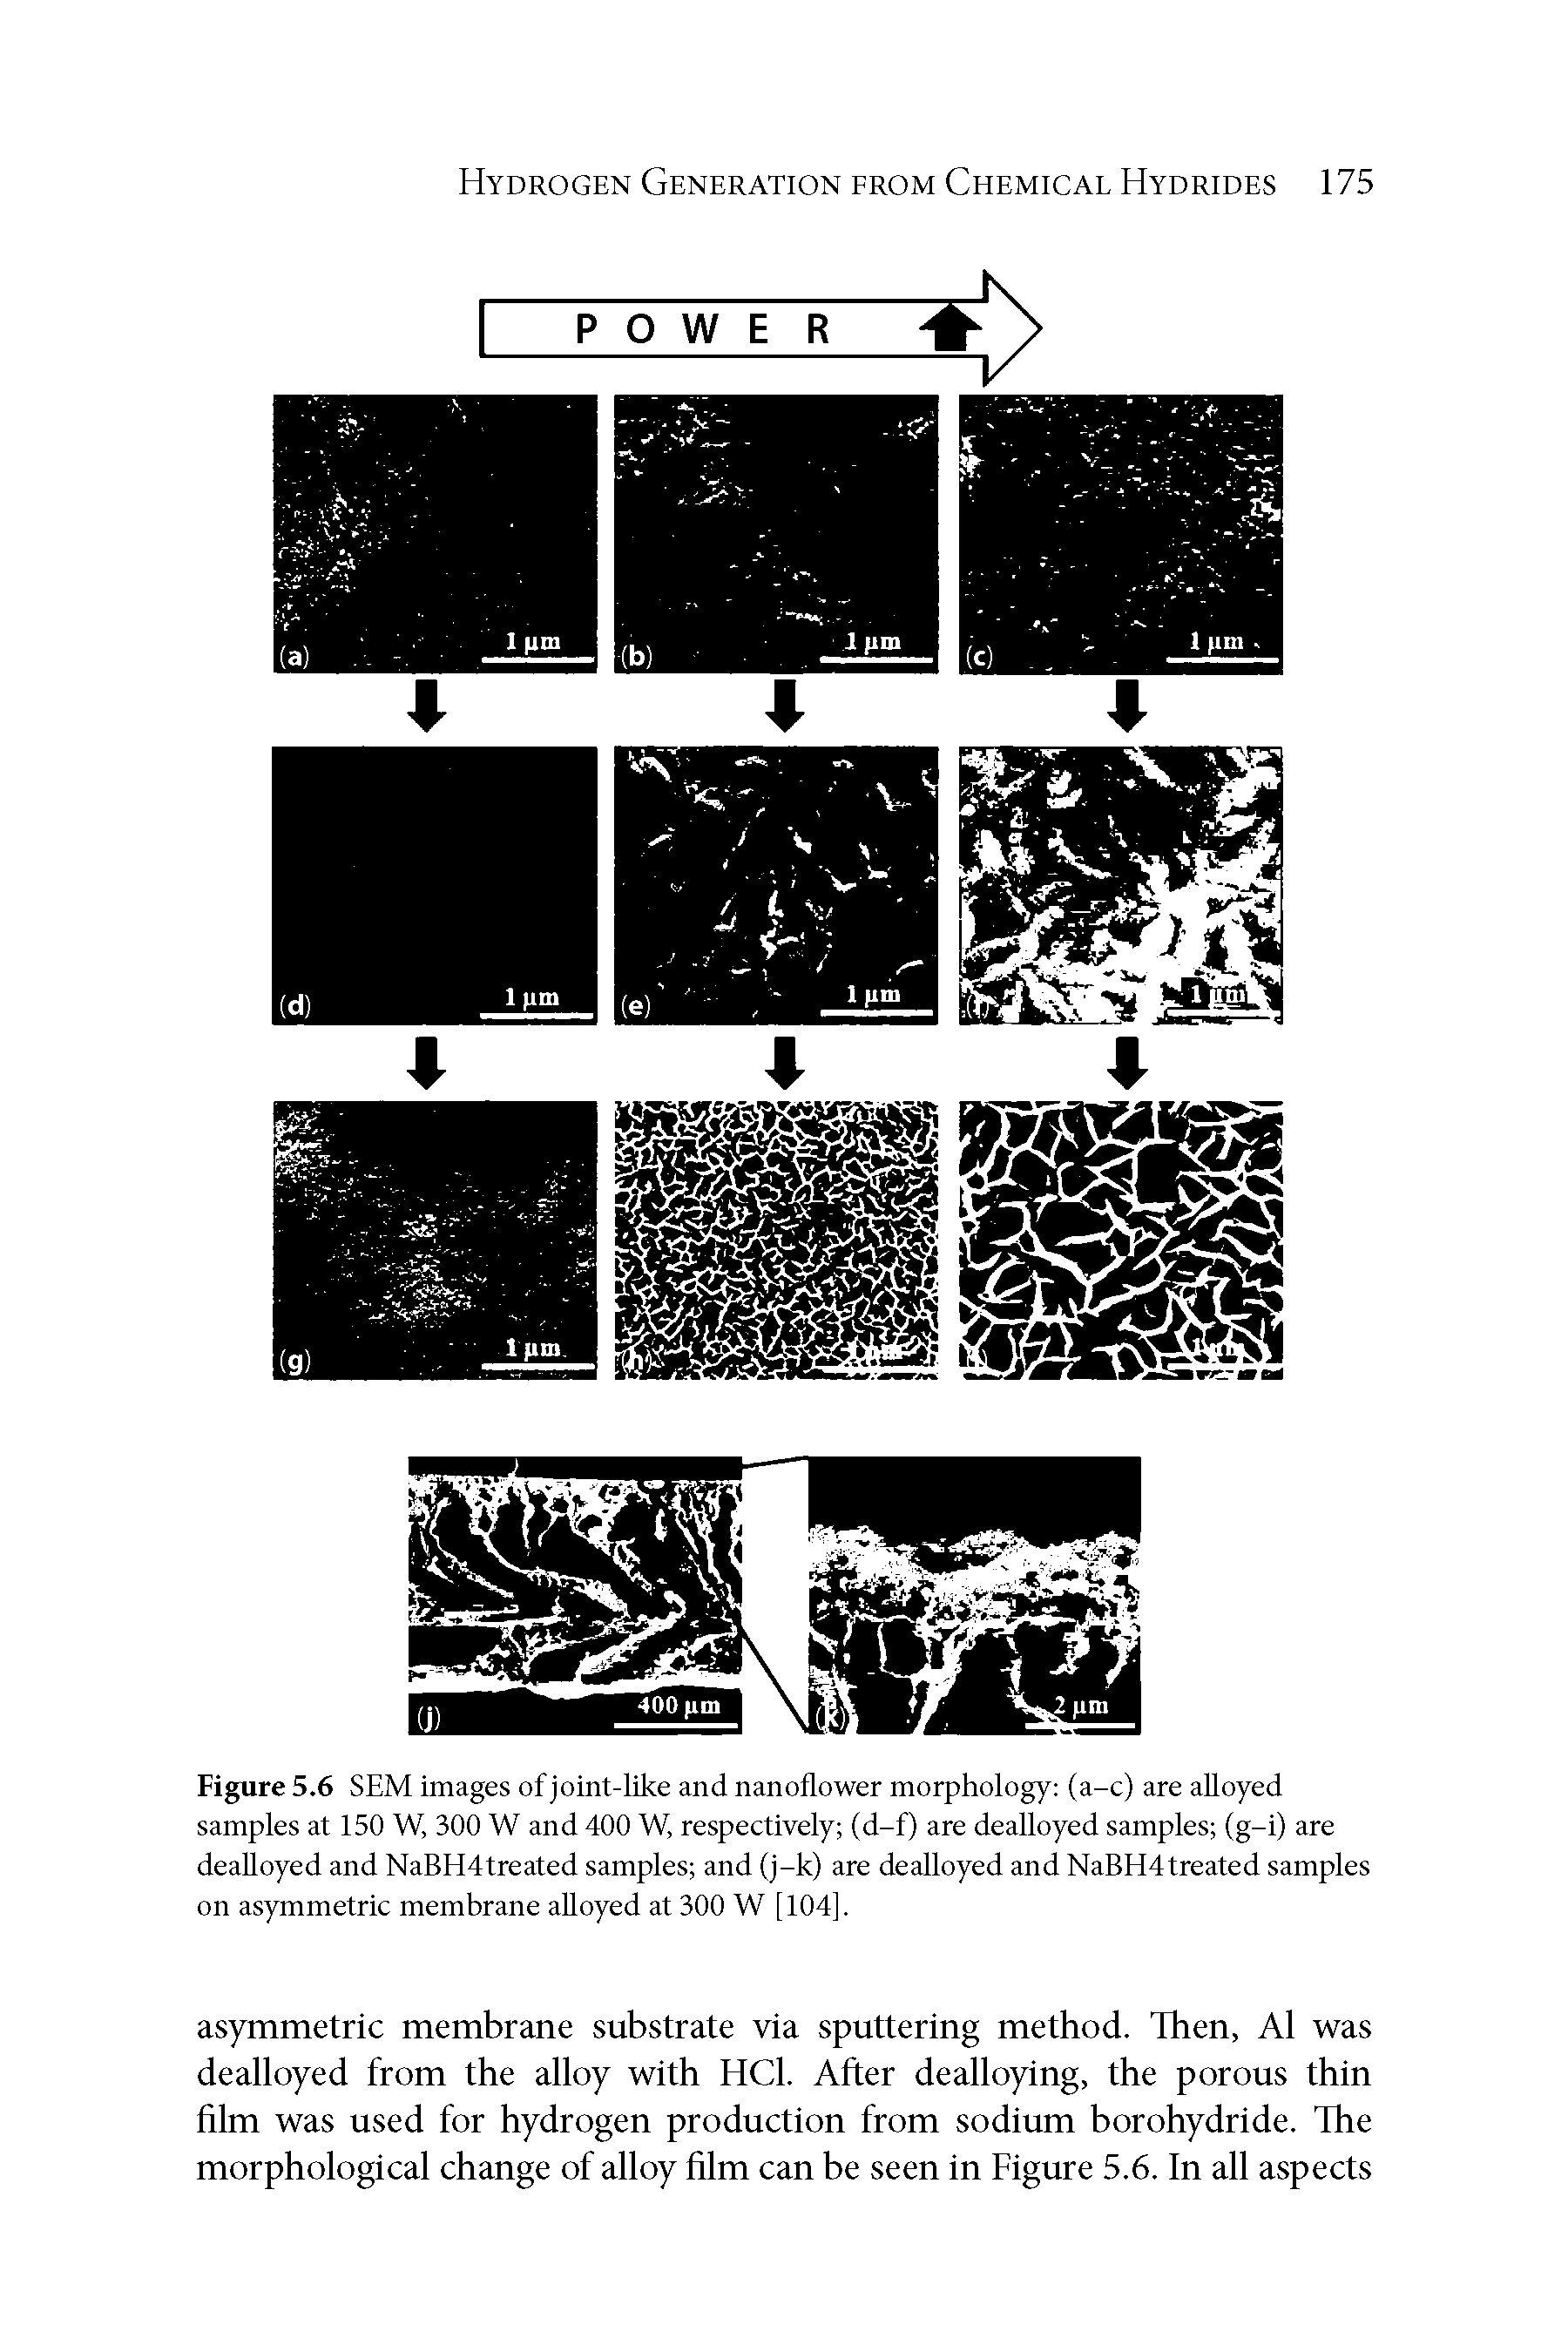 Figure 5.6 SEM images of joint-like and nanoflower morphology (a-c) are alloyed samples at 150 W, 300 W and 400 W, respectively (d-f) are dealloyed samples (g-i) are deaUoyed and NaBH4treated samples and (j-k) are dealloyed and NaBH4treated samples on asymmetric membrane alloyed at 300 W [104].